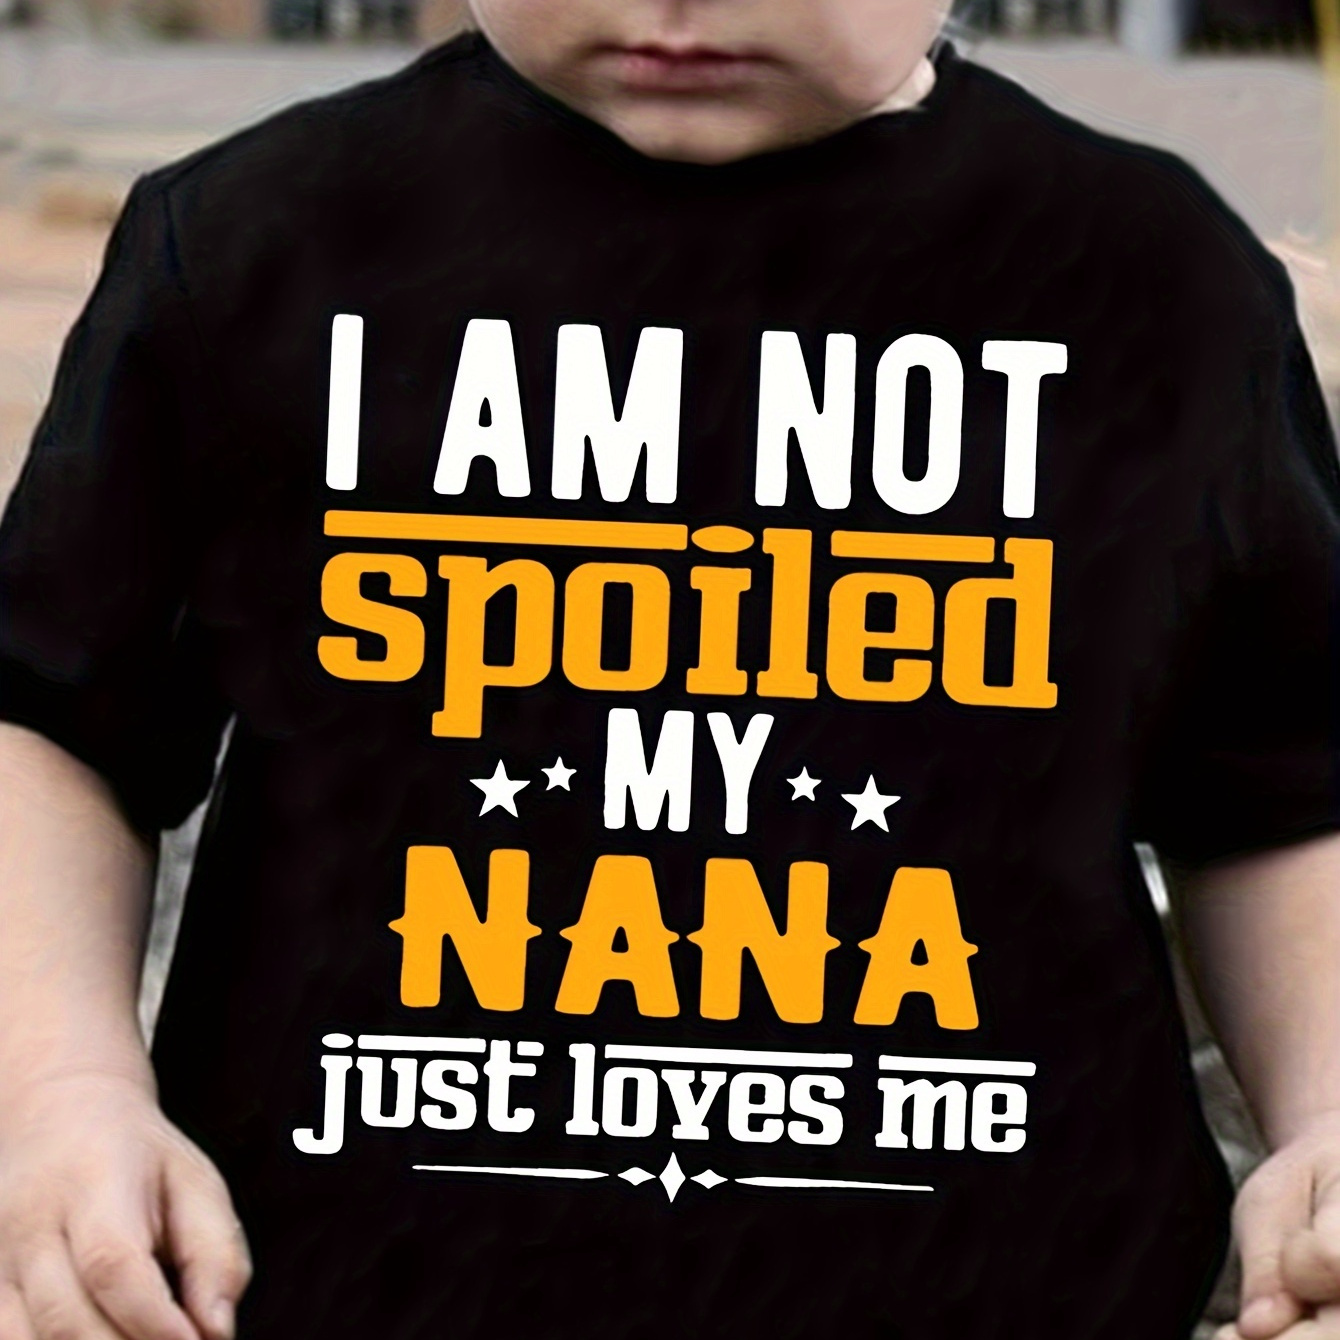 

I Am Not Spoiled My Nana Just Loves Me Print Boy's Creative T-shirt, Vibrant Comfortable Crew Neck Top, Kids Summer Clothing